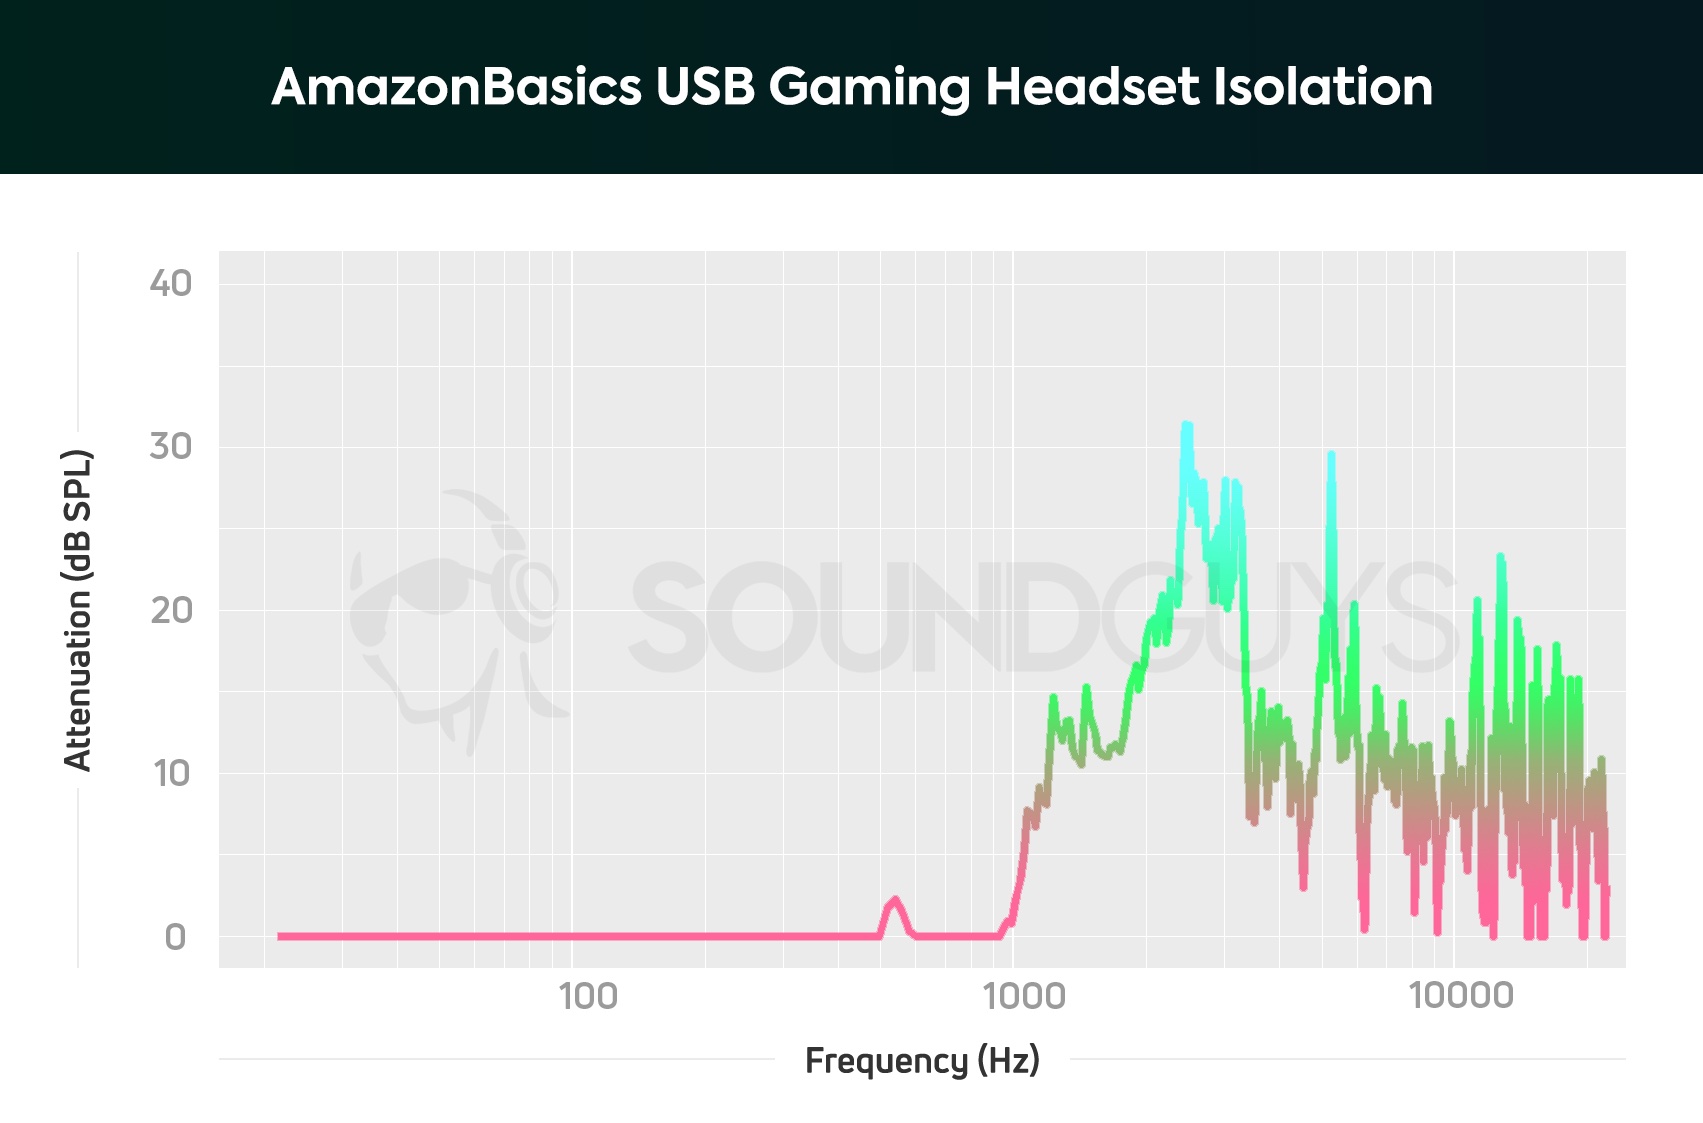 An isolation chart for the AmazonBasics USB Gaming Headset